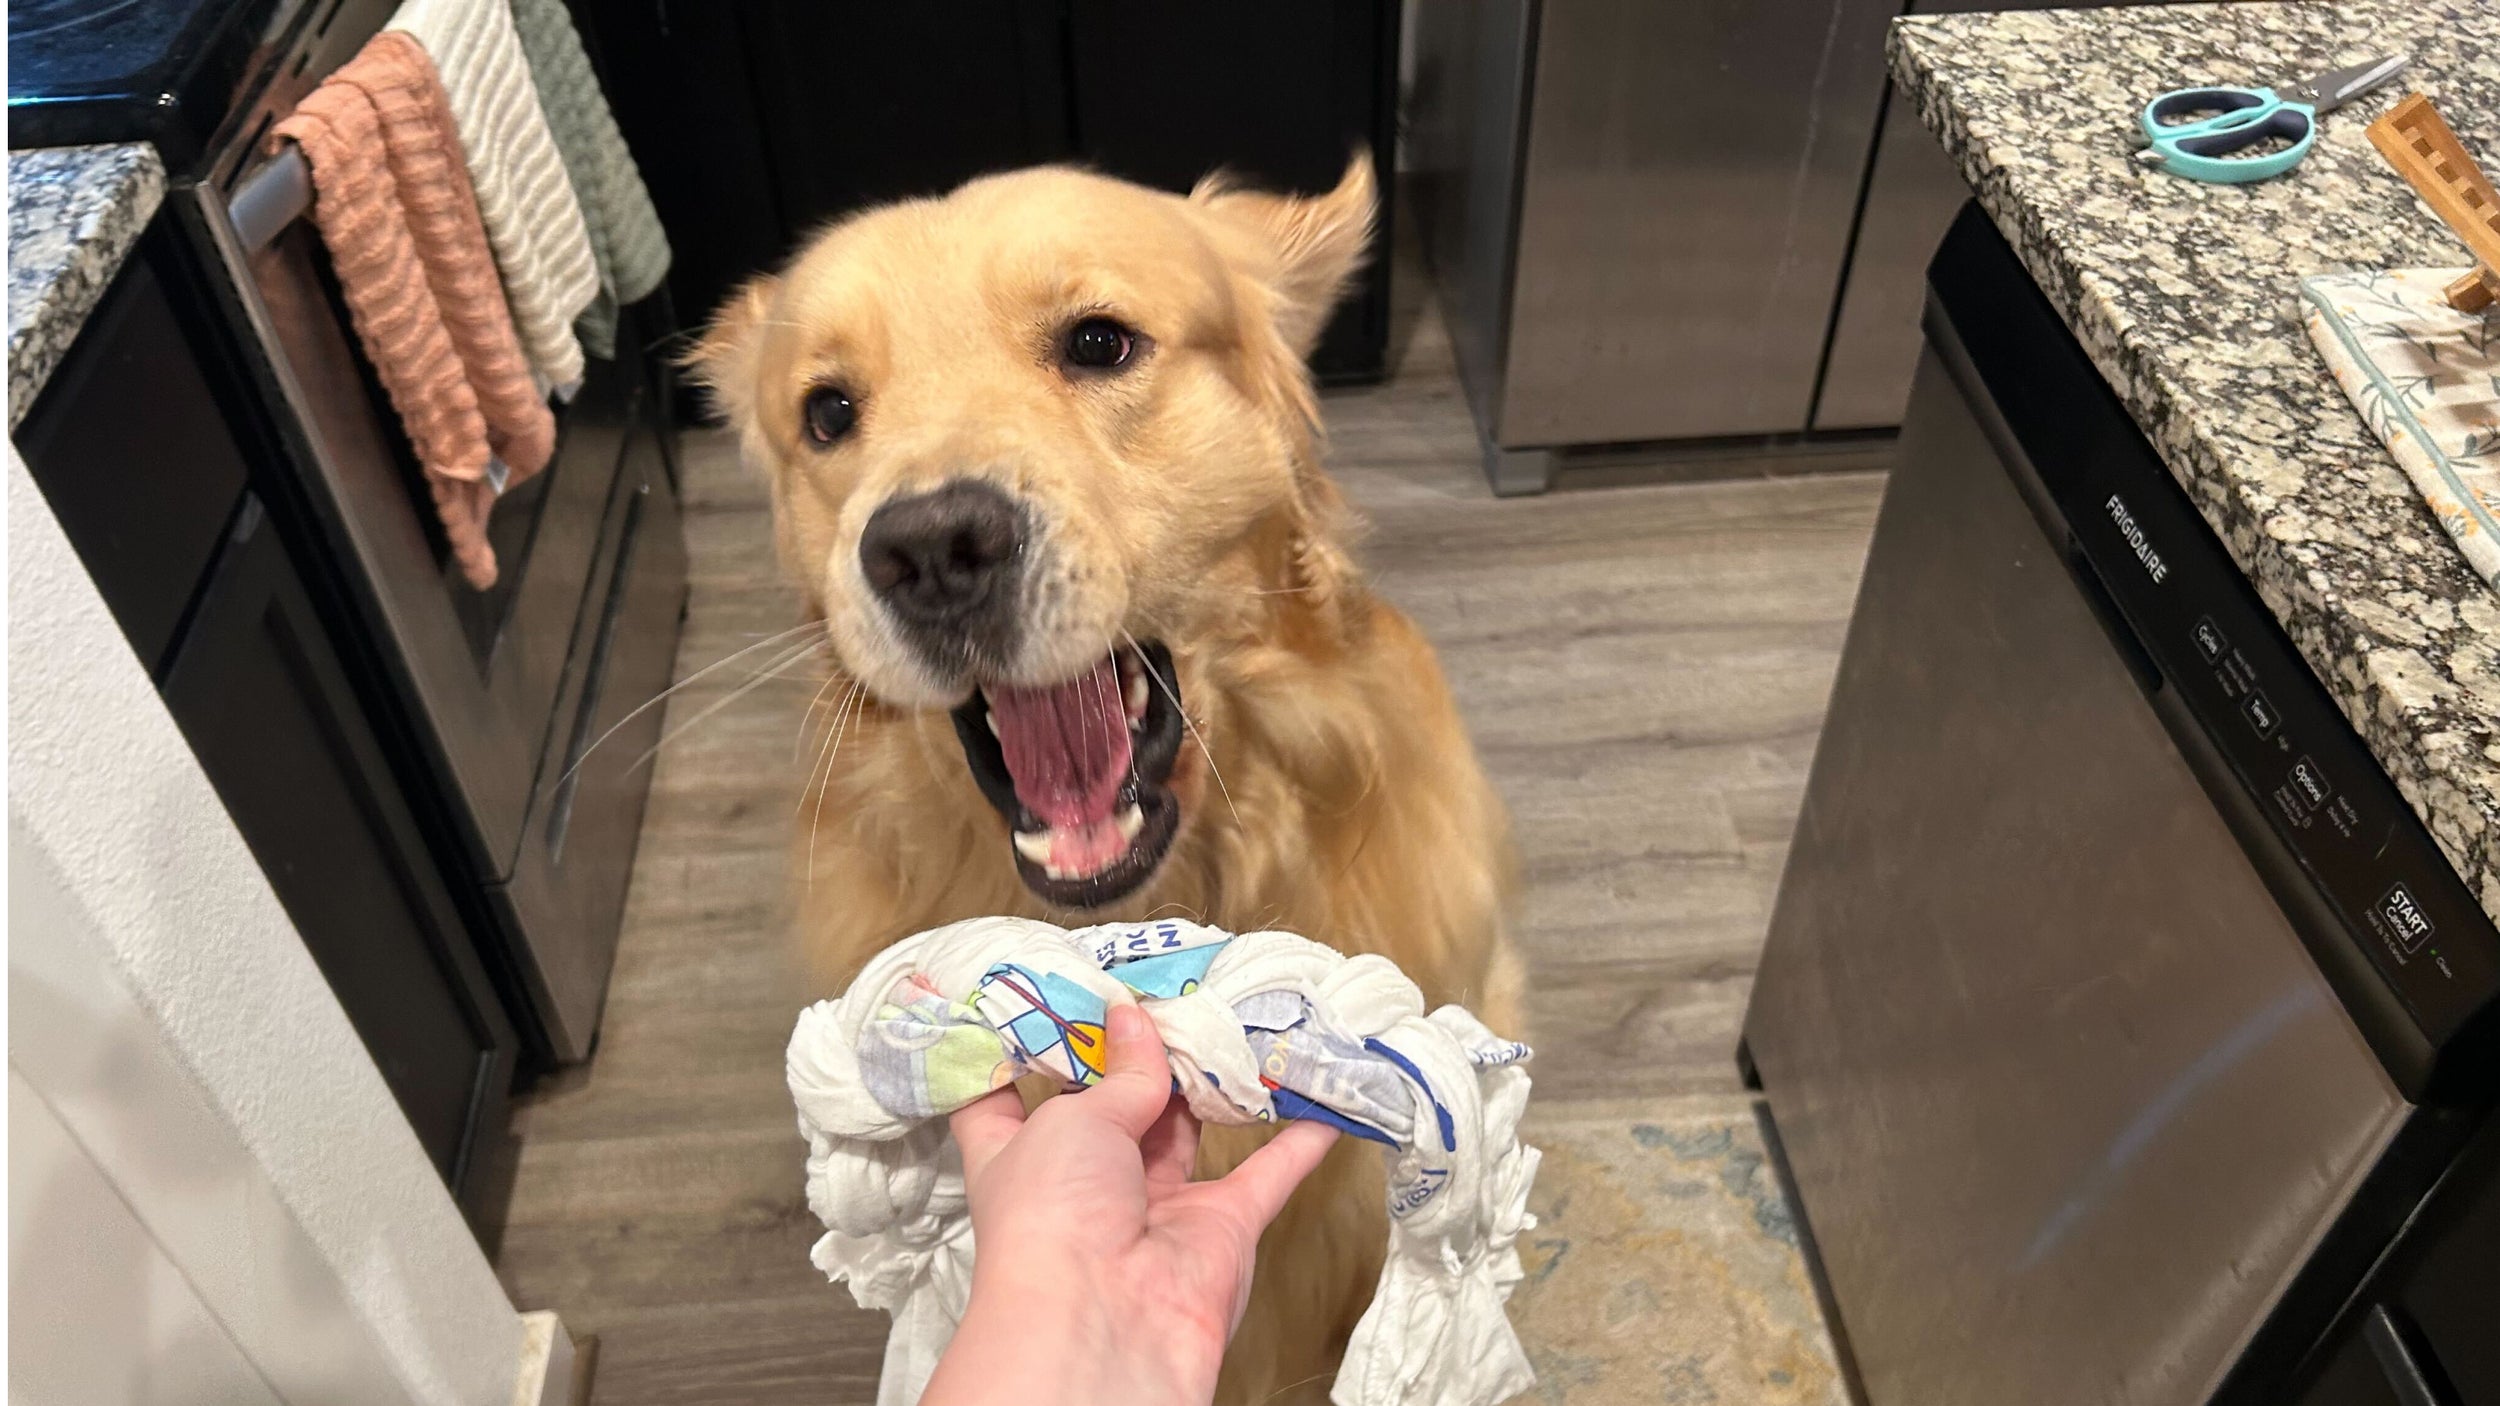 A golden retreiver in a kitchen leaps toward a hand holding a homemade tug-of-war toy